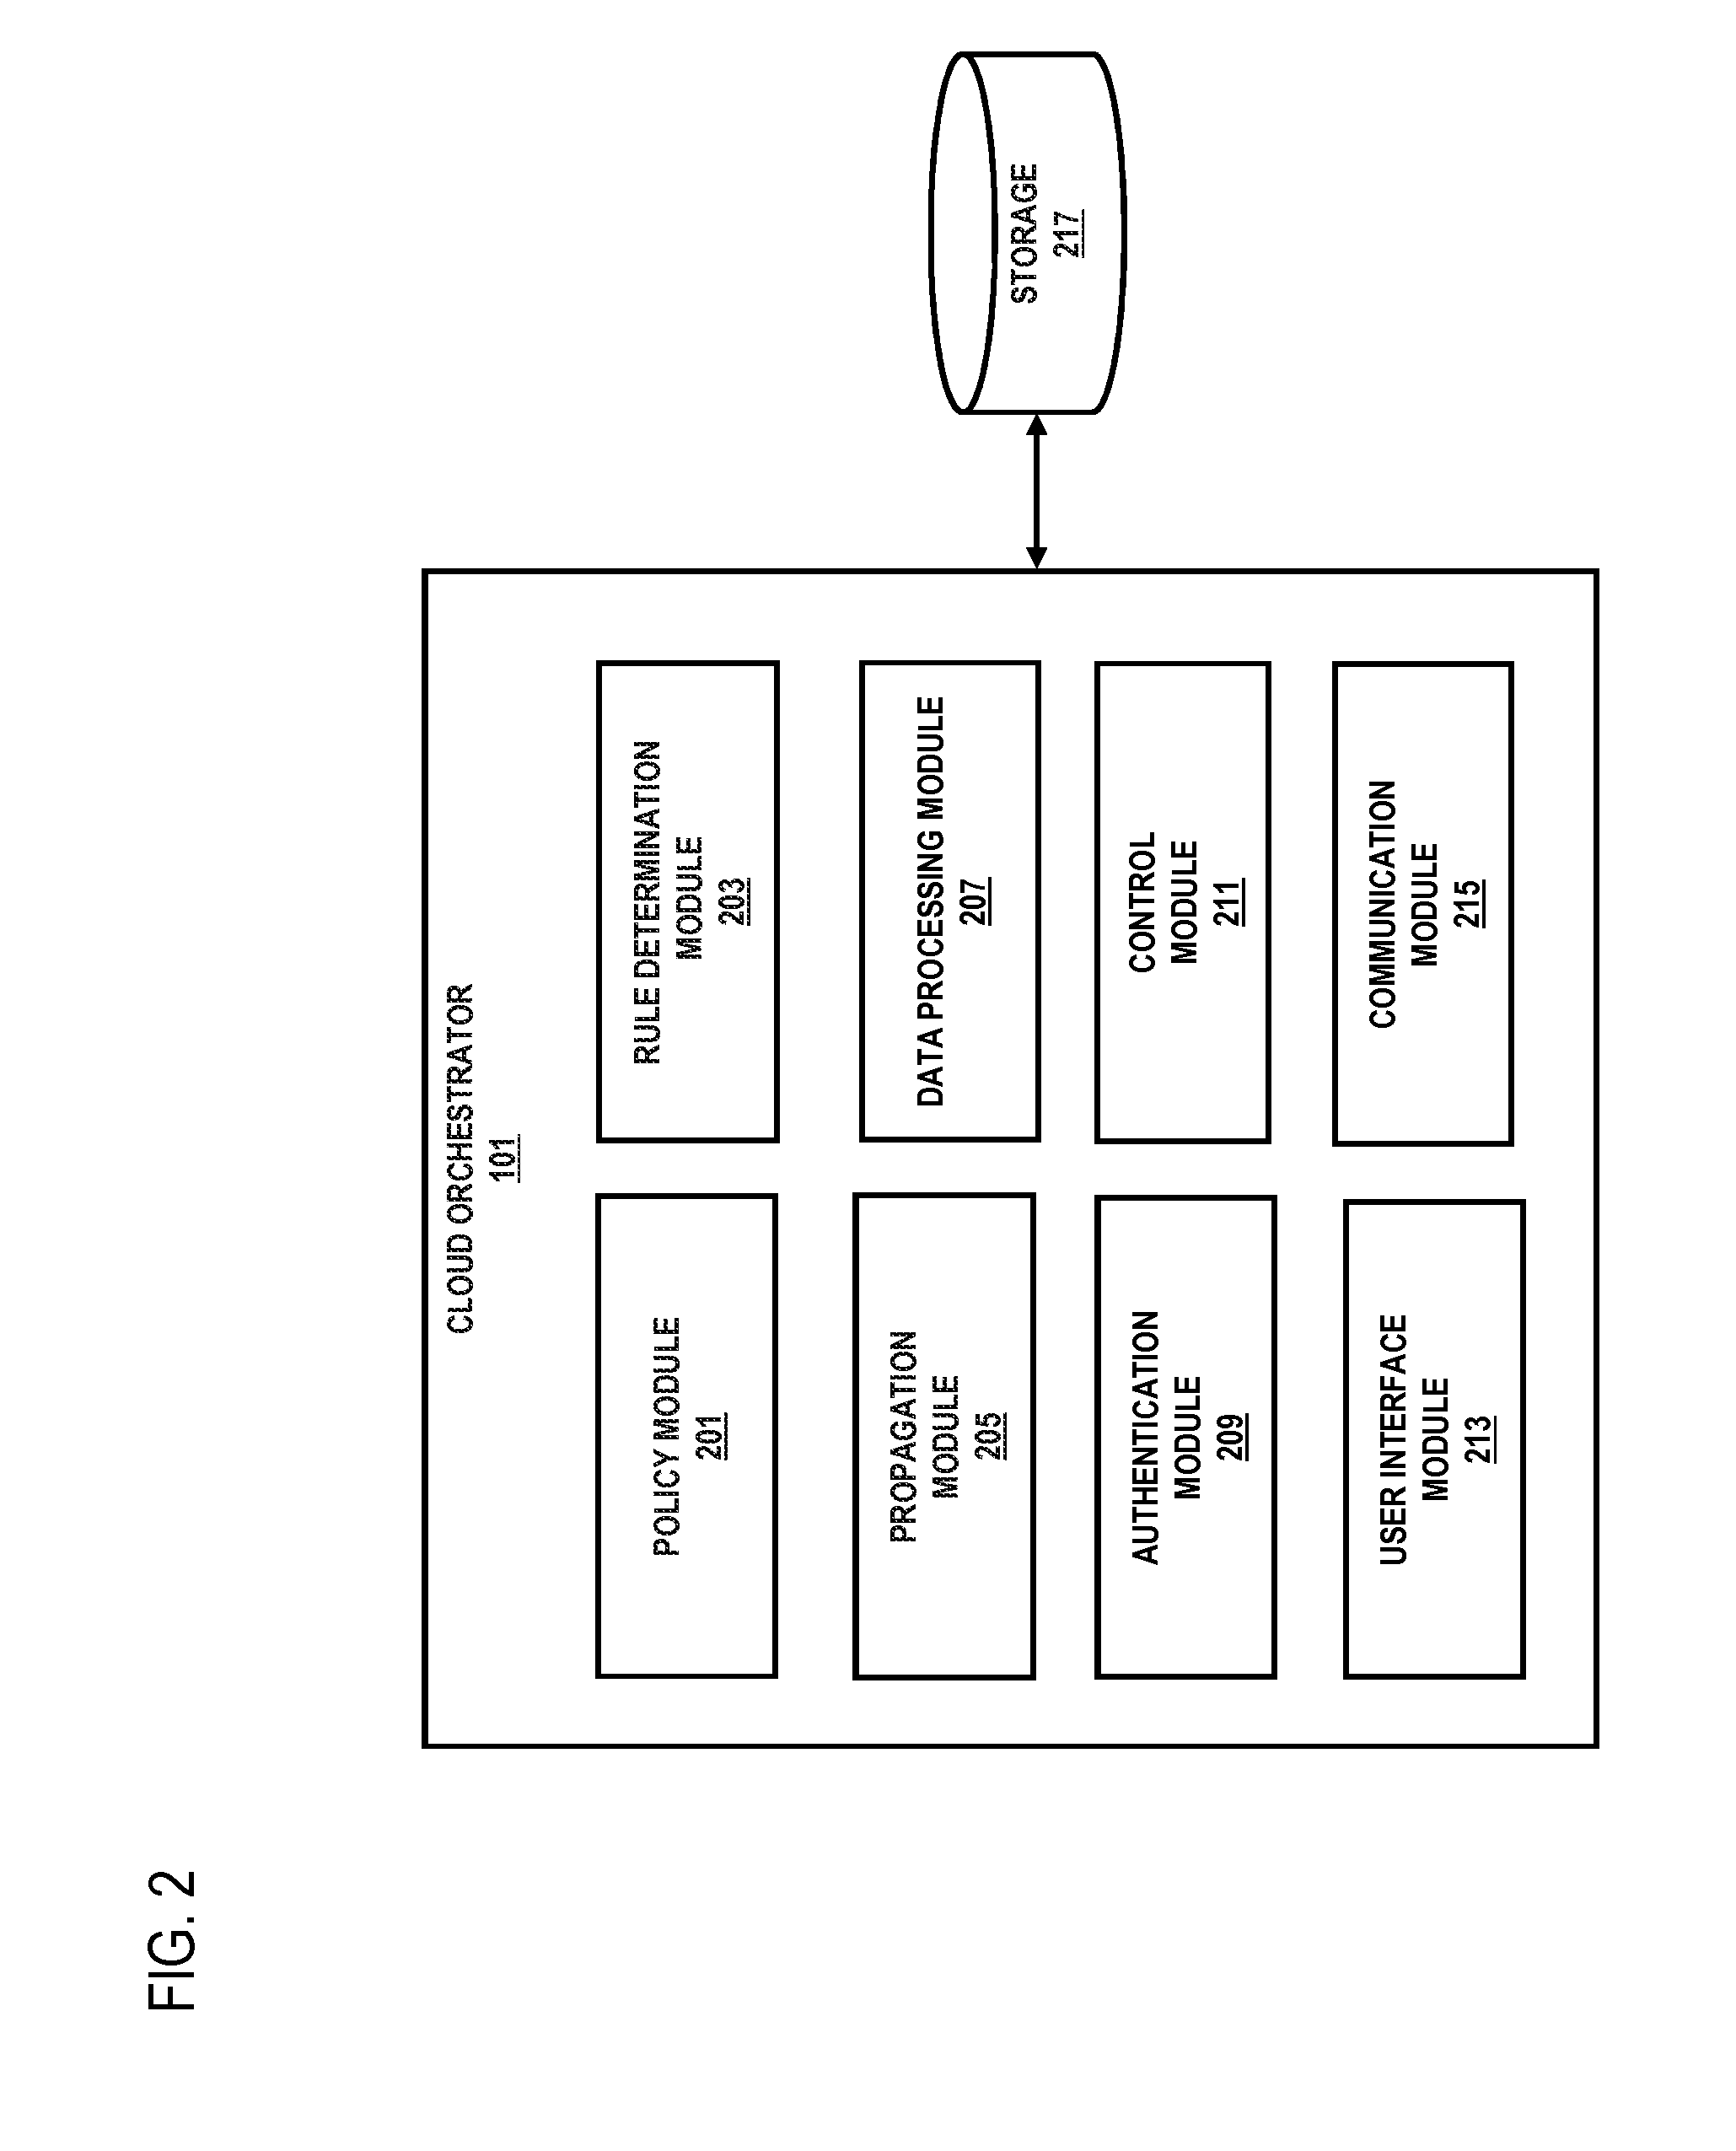 Method and apparatus for dynamic provisioning of communication services